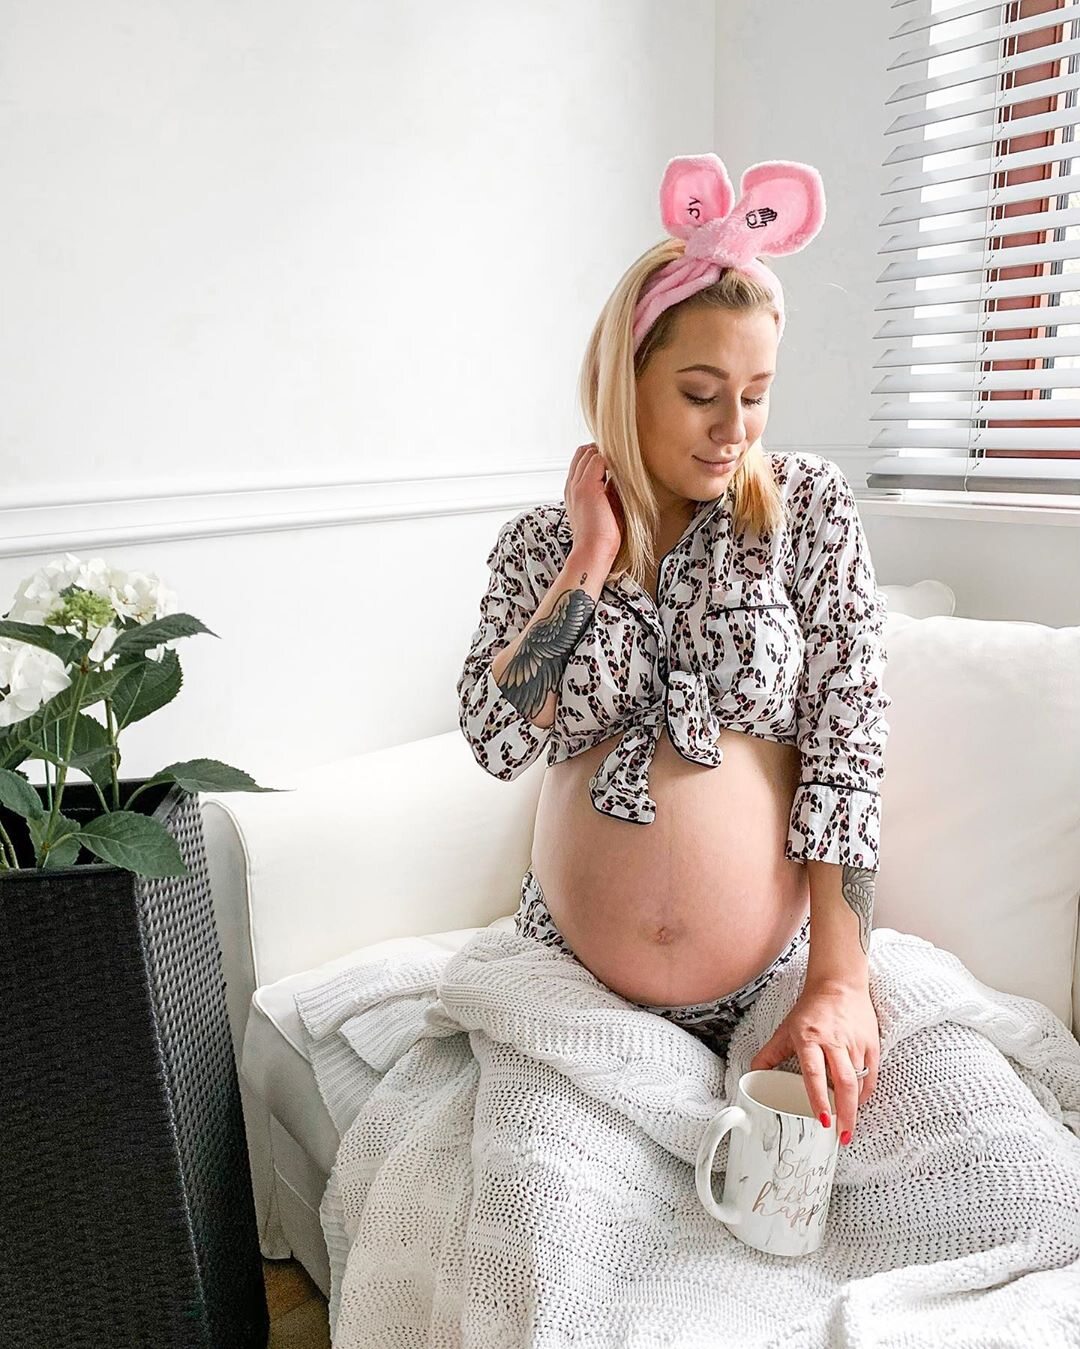 The YouTuber talks honestly about her postpartum period.  "I stood in the shower and screamed in pain"